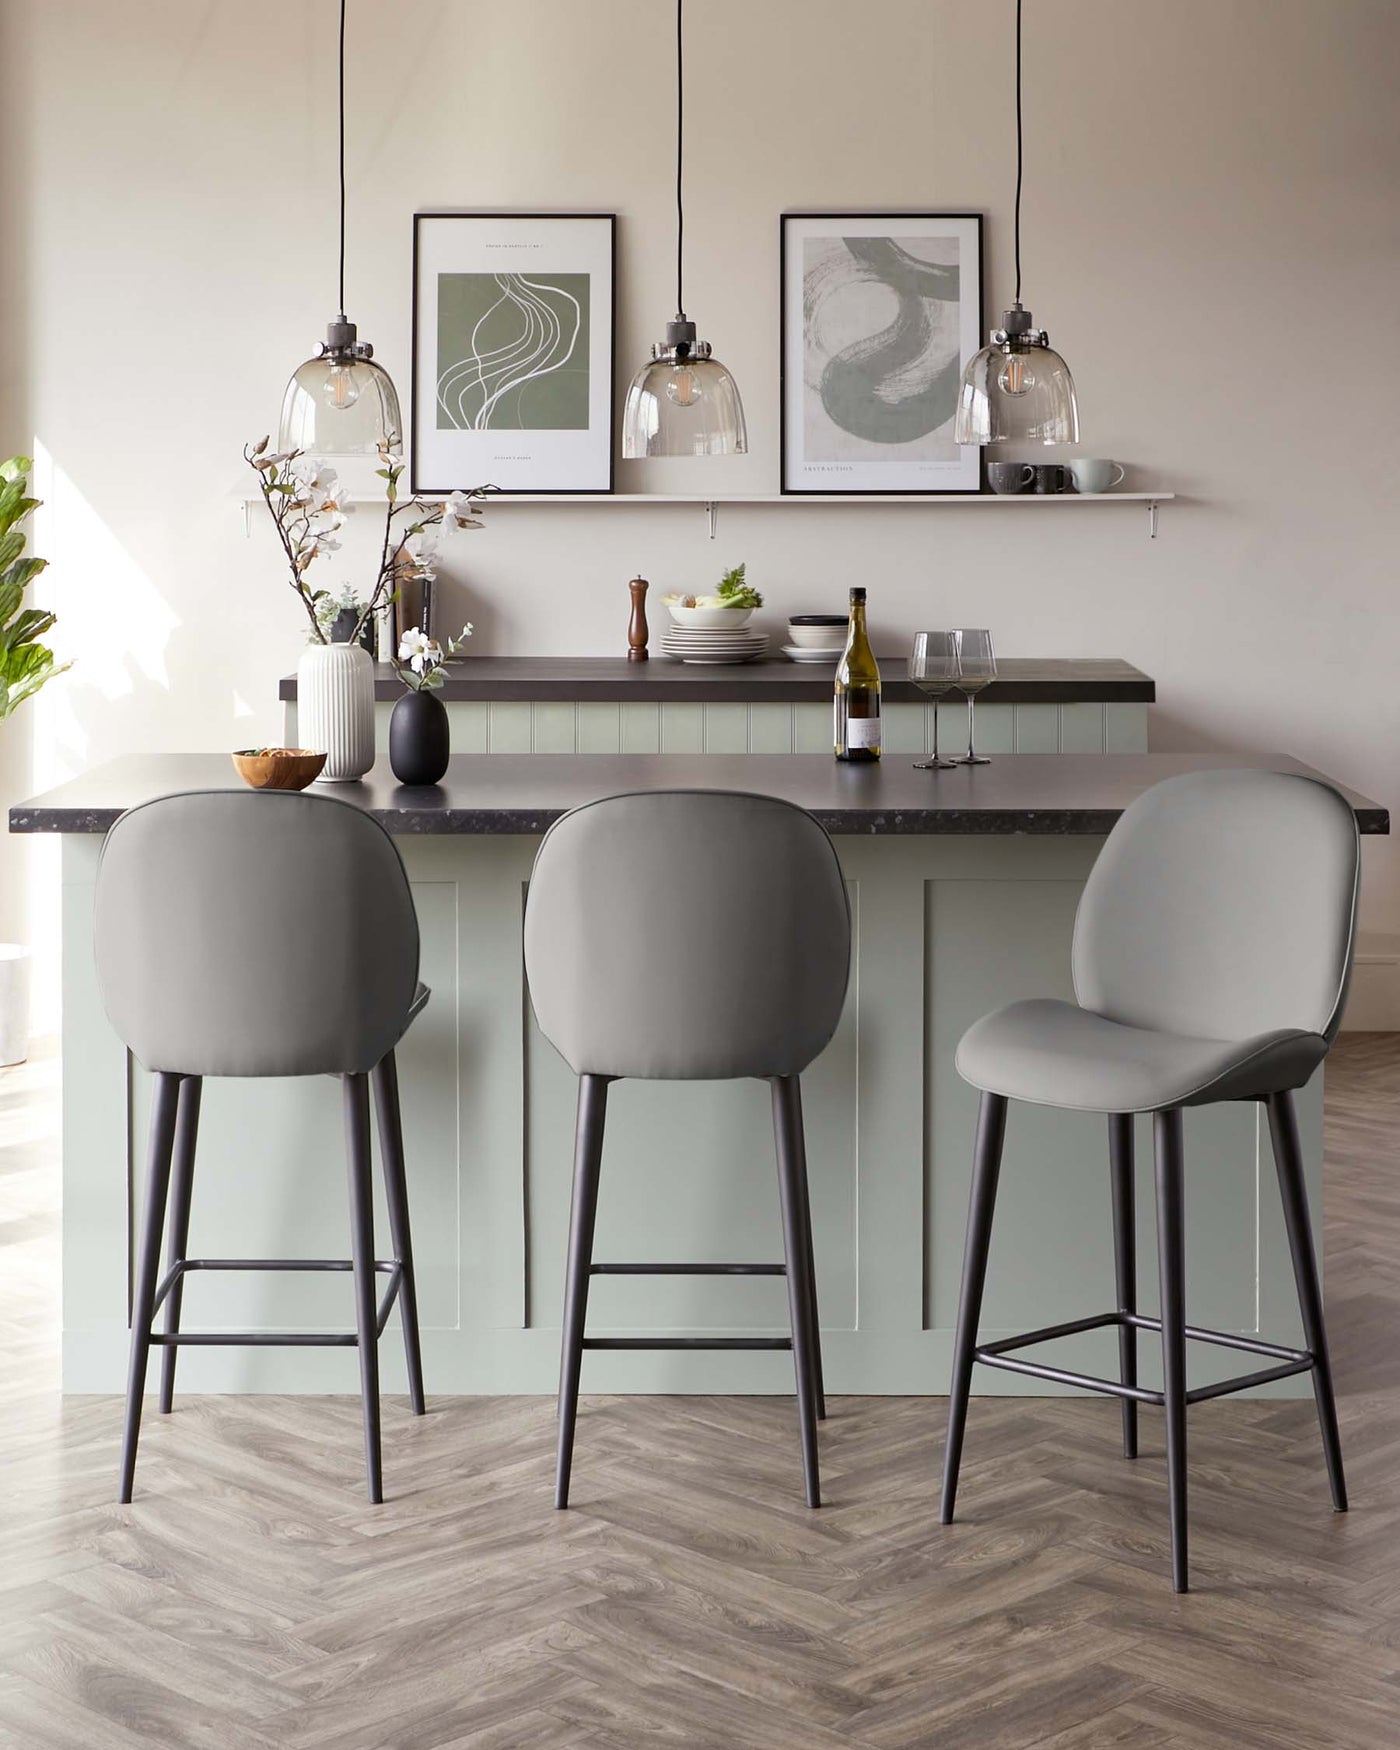 Modern kitchen island with elegant grey counter and sage green cabinetry, complemented by sleek bar stools with curved backrests and slender black metal legs.